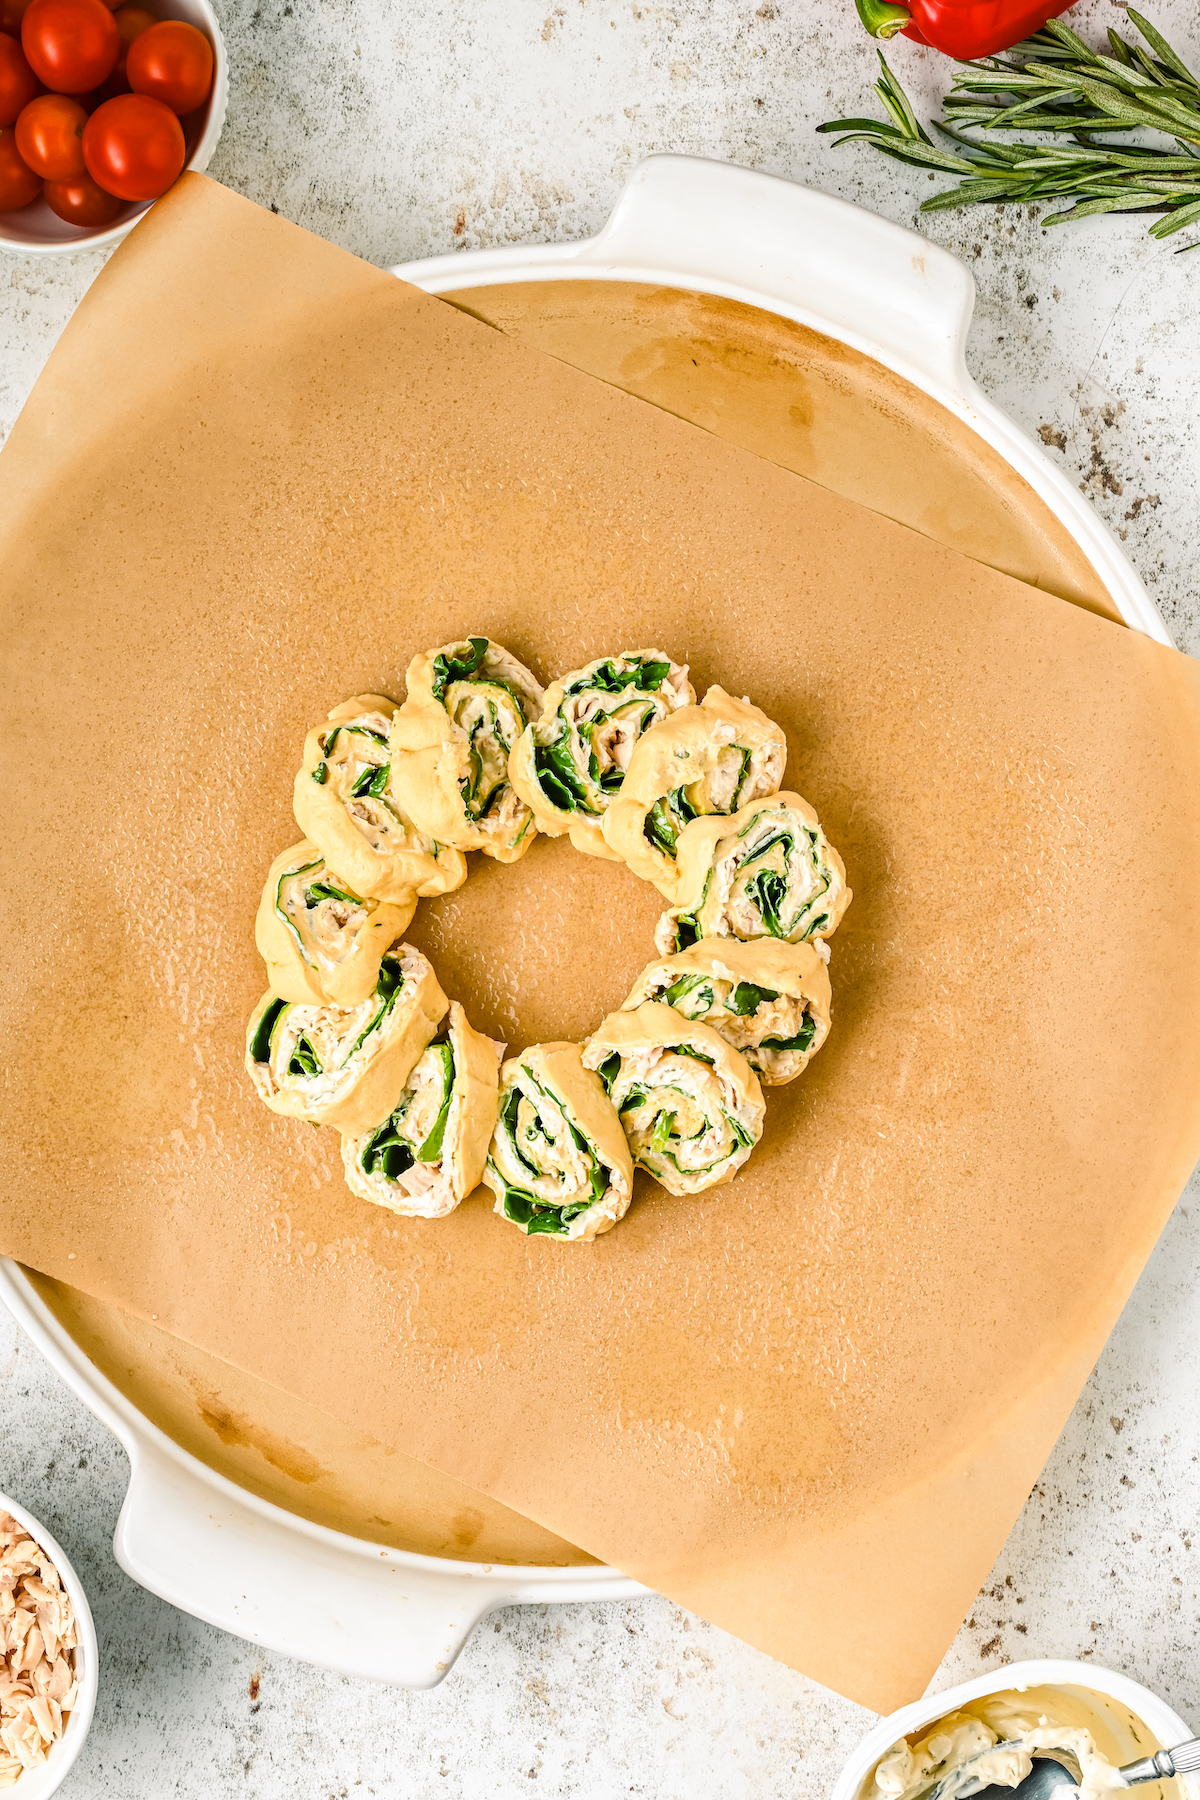 Crescent pinwheels with spinach and chicken arranged in a circle.